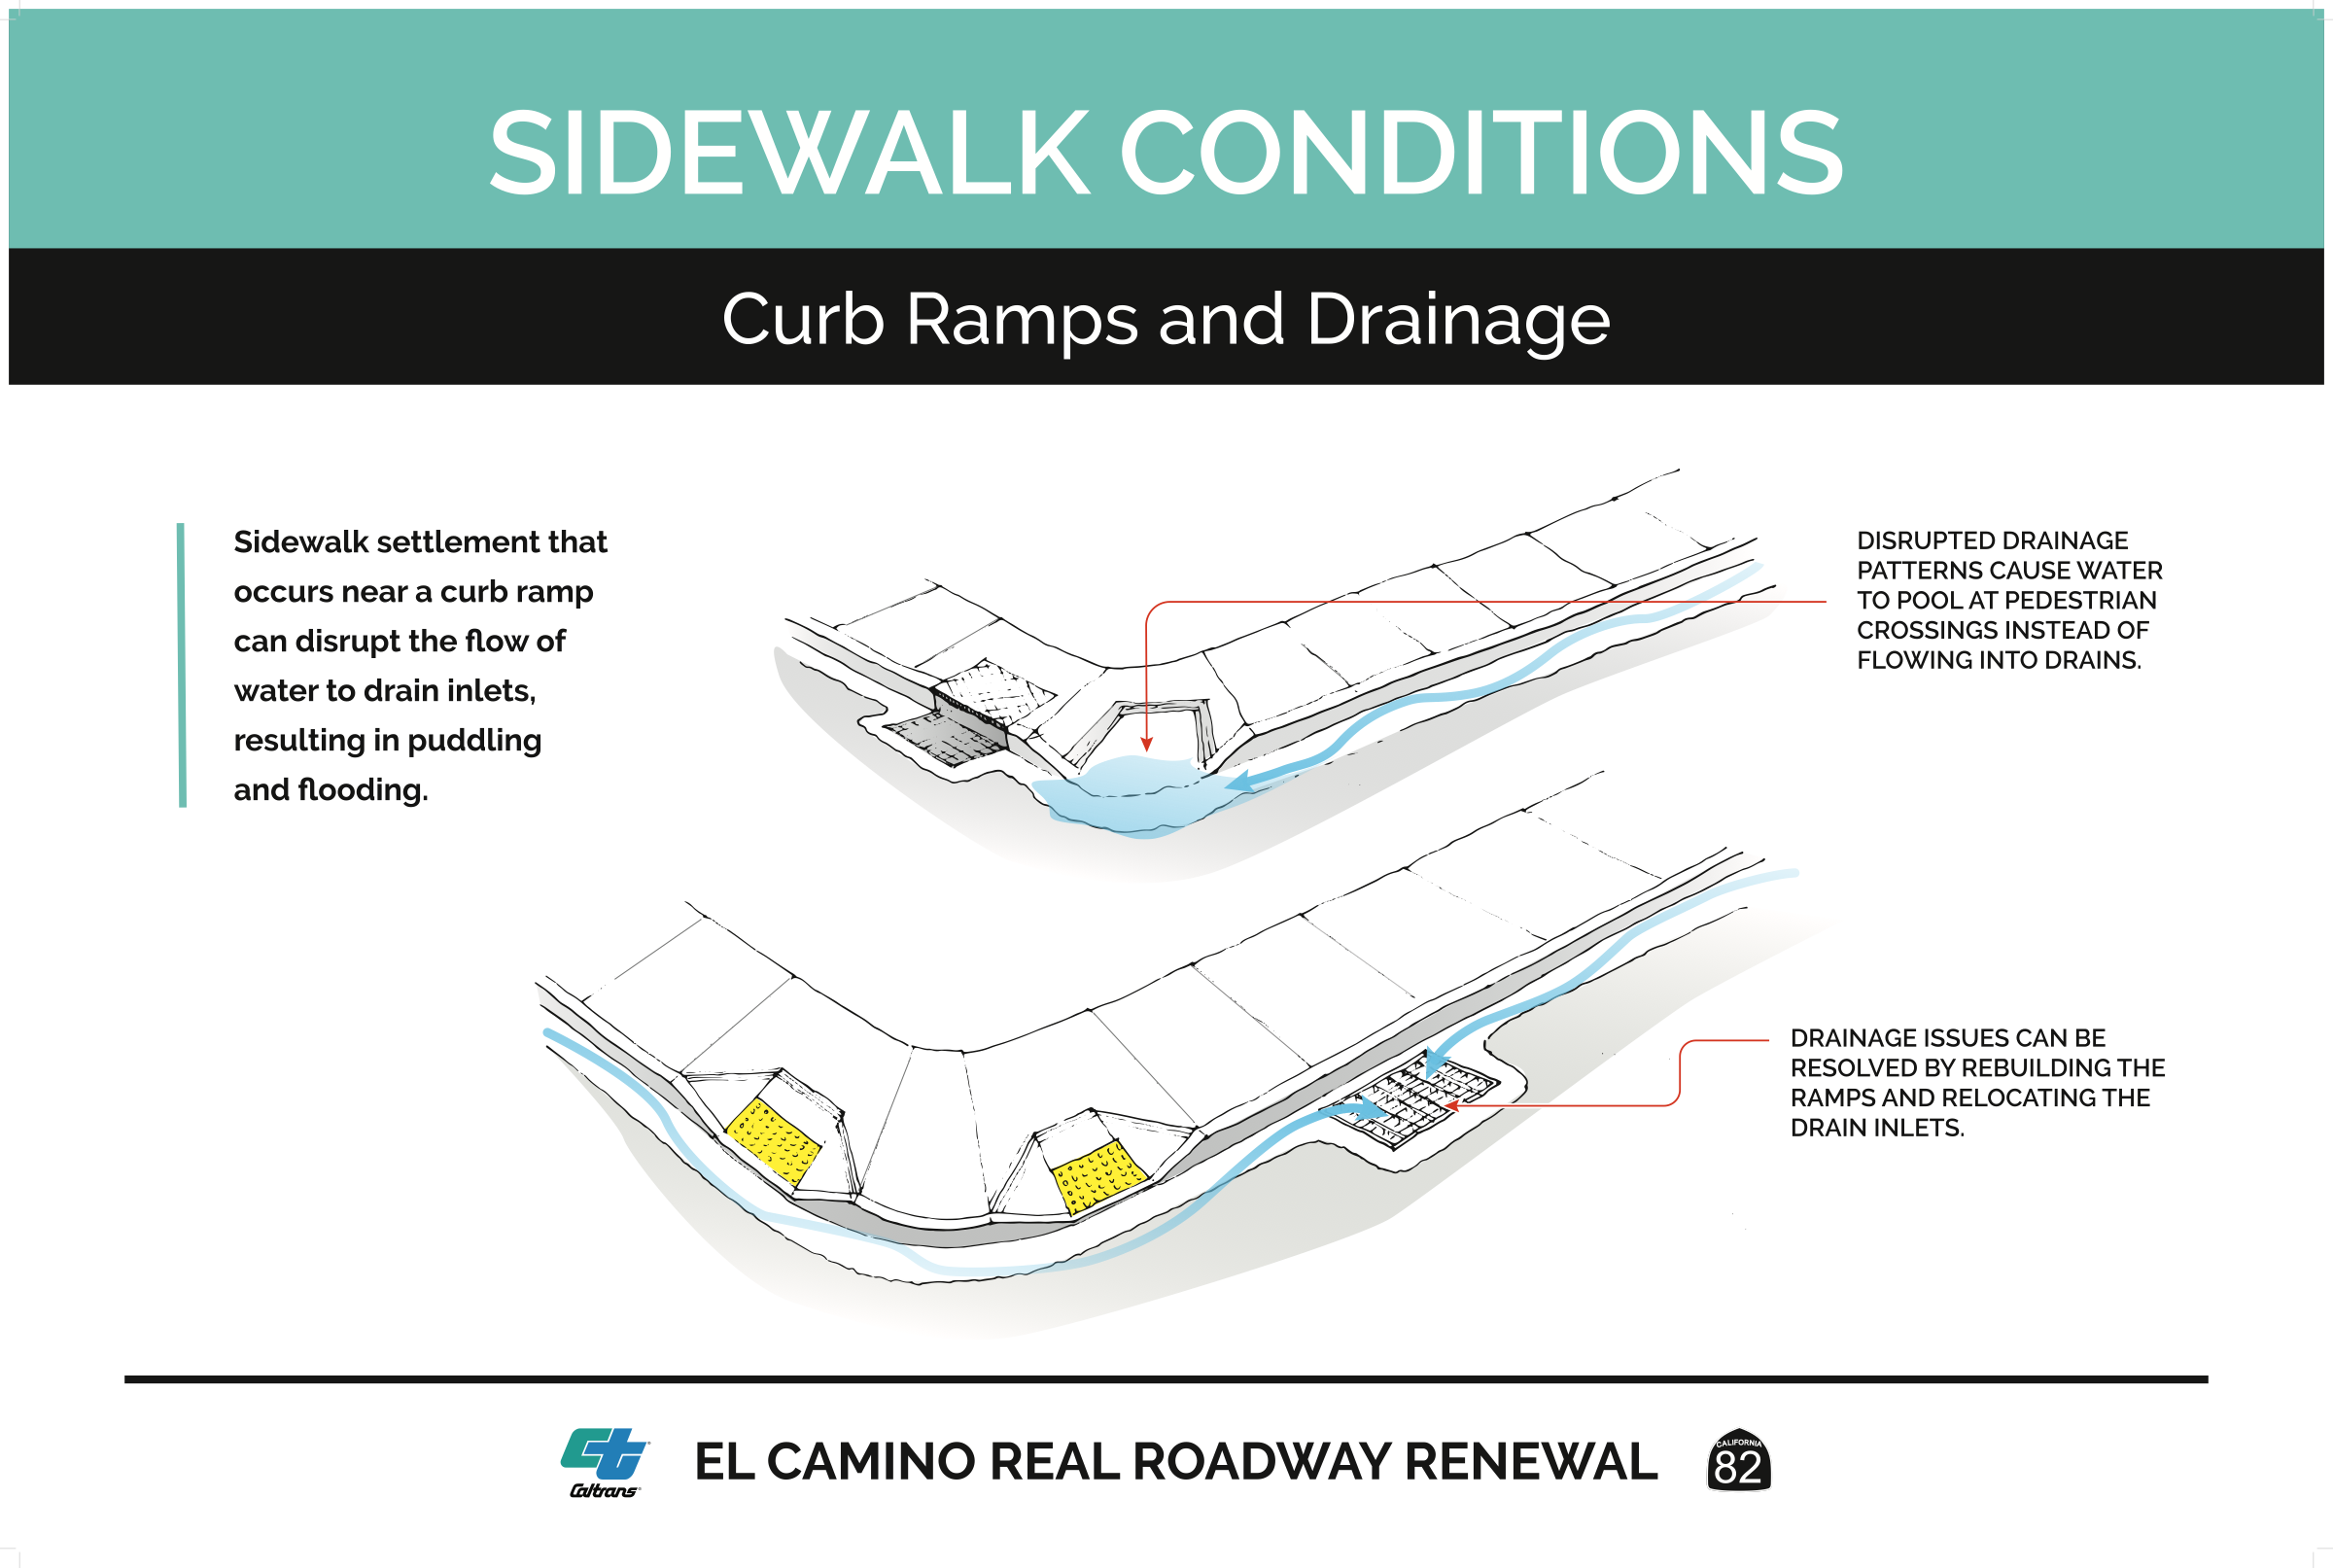 sidewalk conditions - curb ramps and drainage